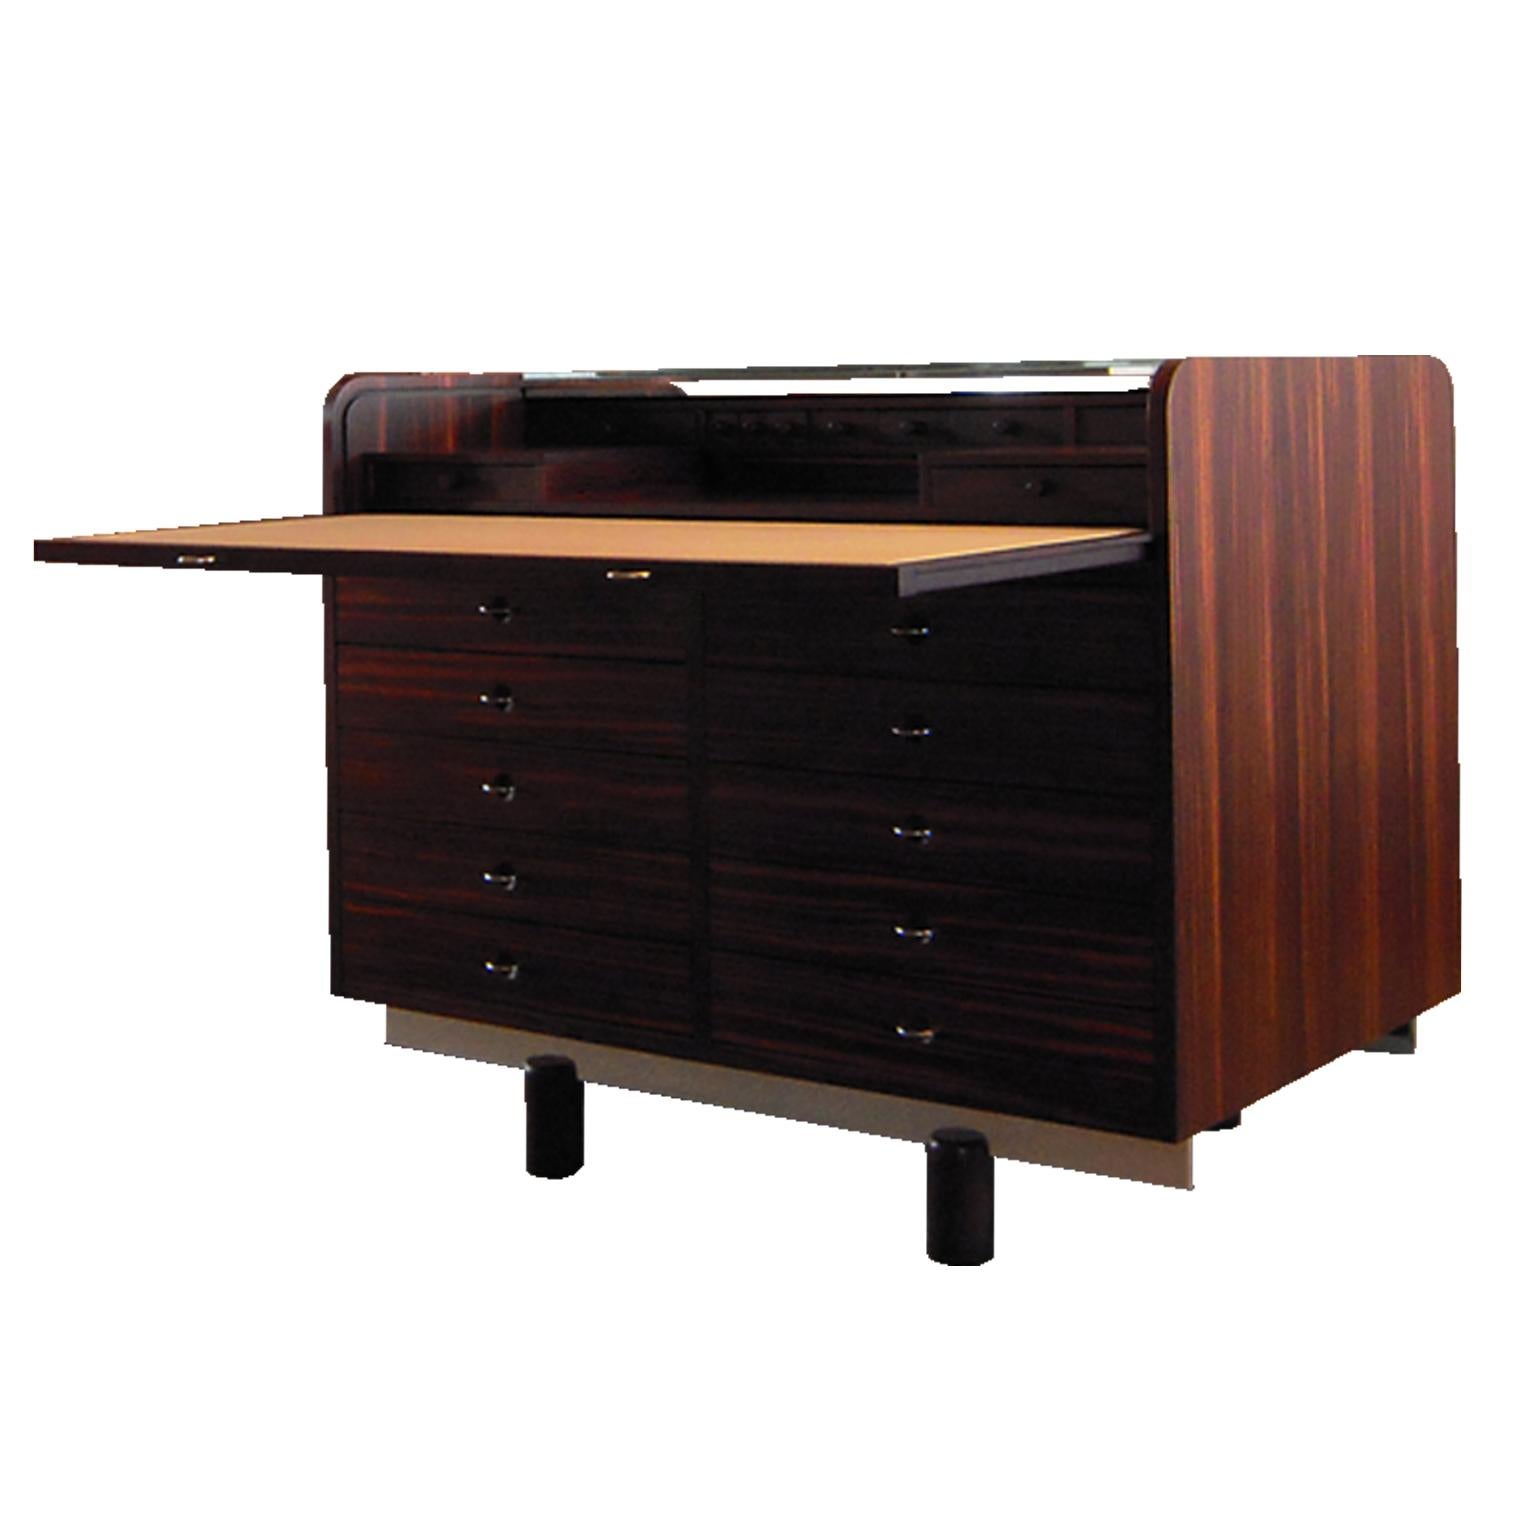 Double-sided secretaire designed by Italian Architect Gianfranco Frattini for Bernini manufacturer in 1961.
The secretaire we are selling was manufacturer in limited edition in ebony wood, numbered n° 001/002 with designer signature.
The